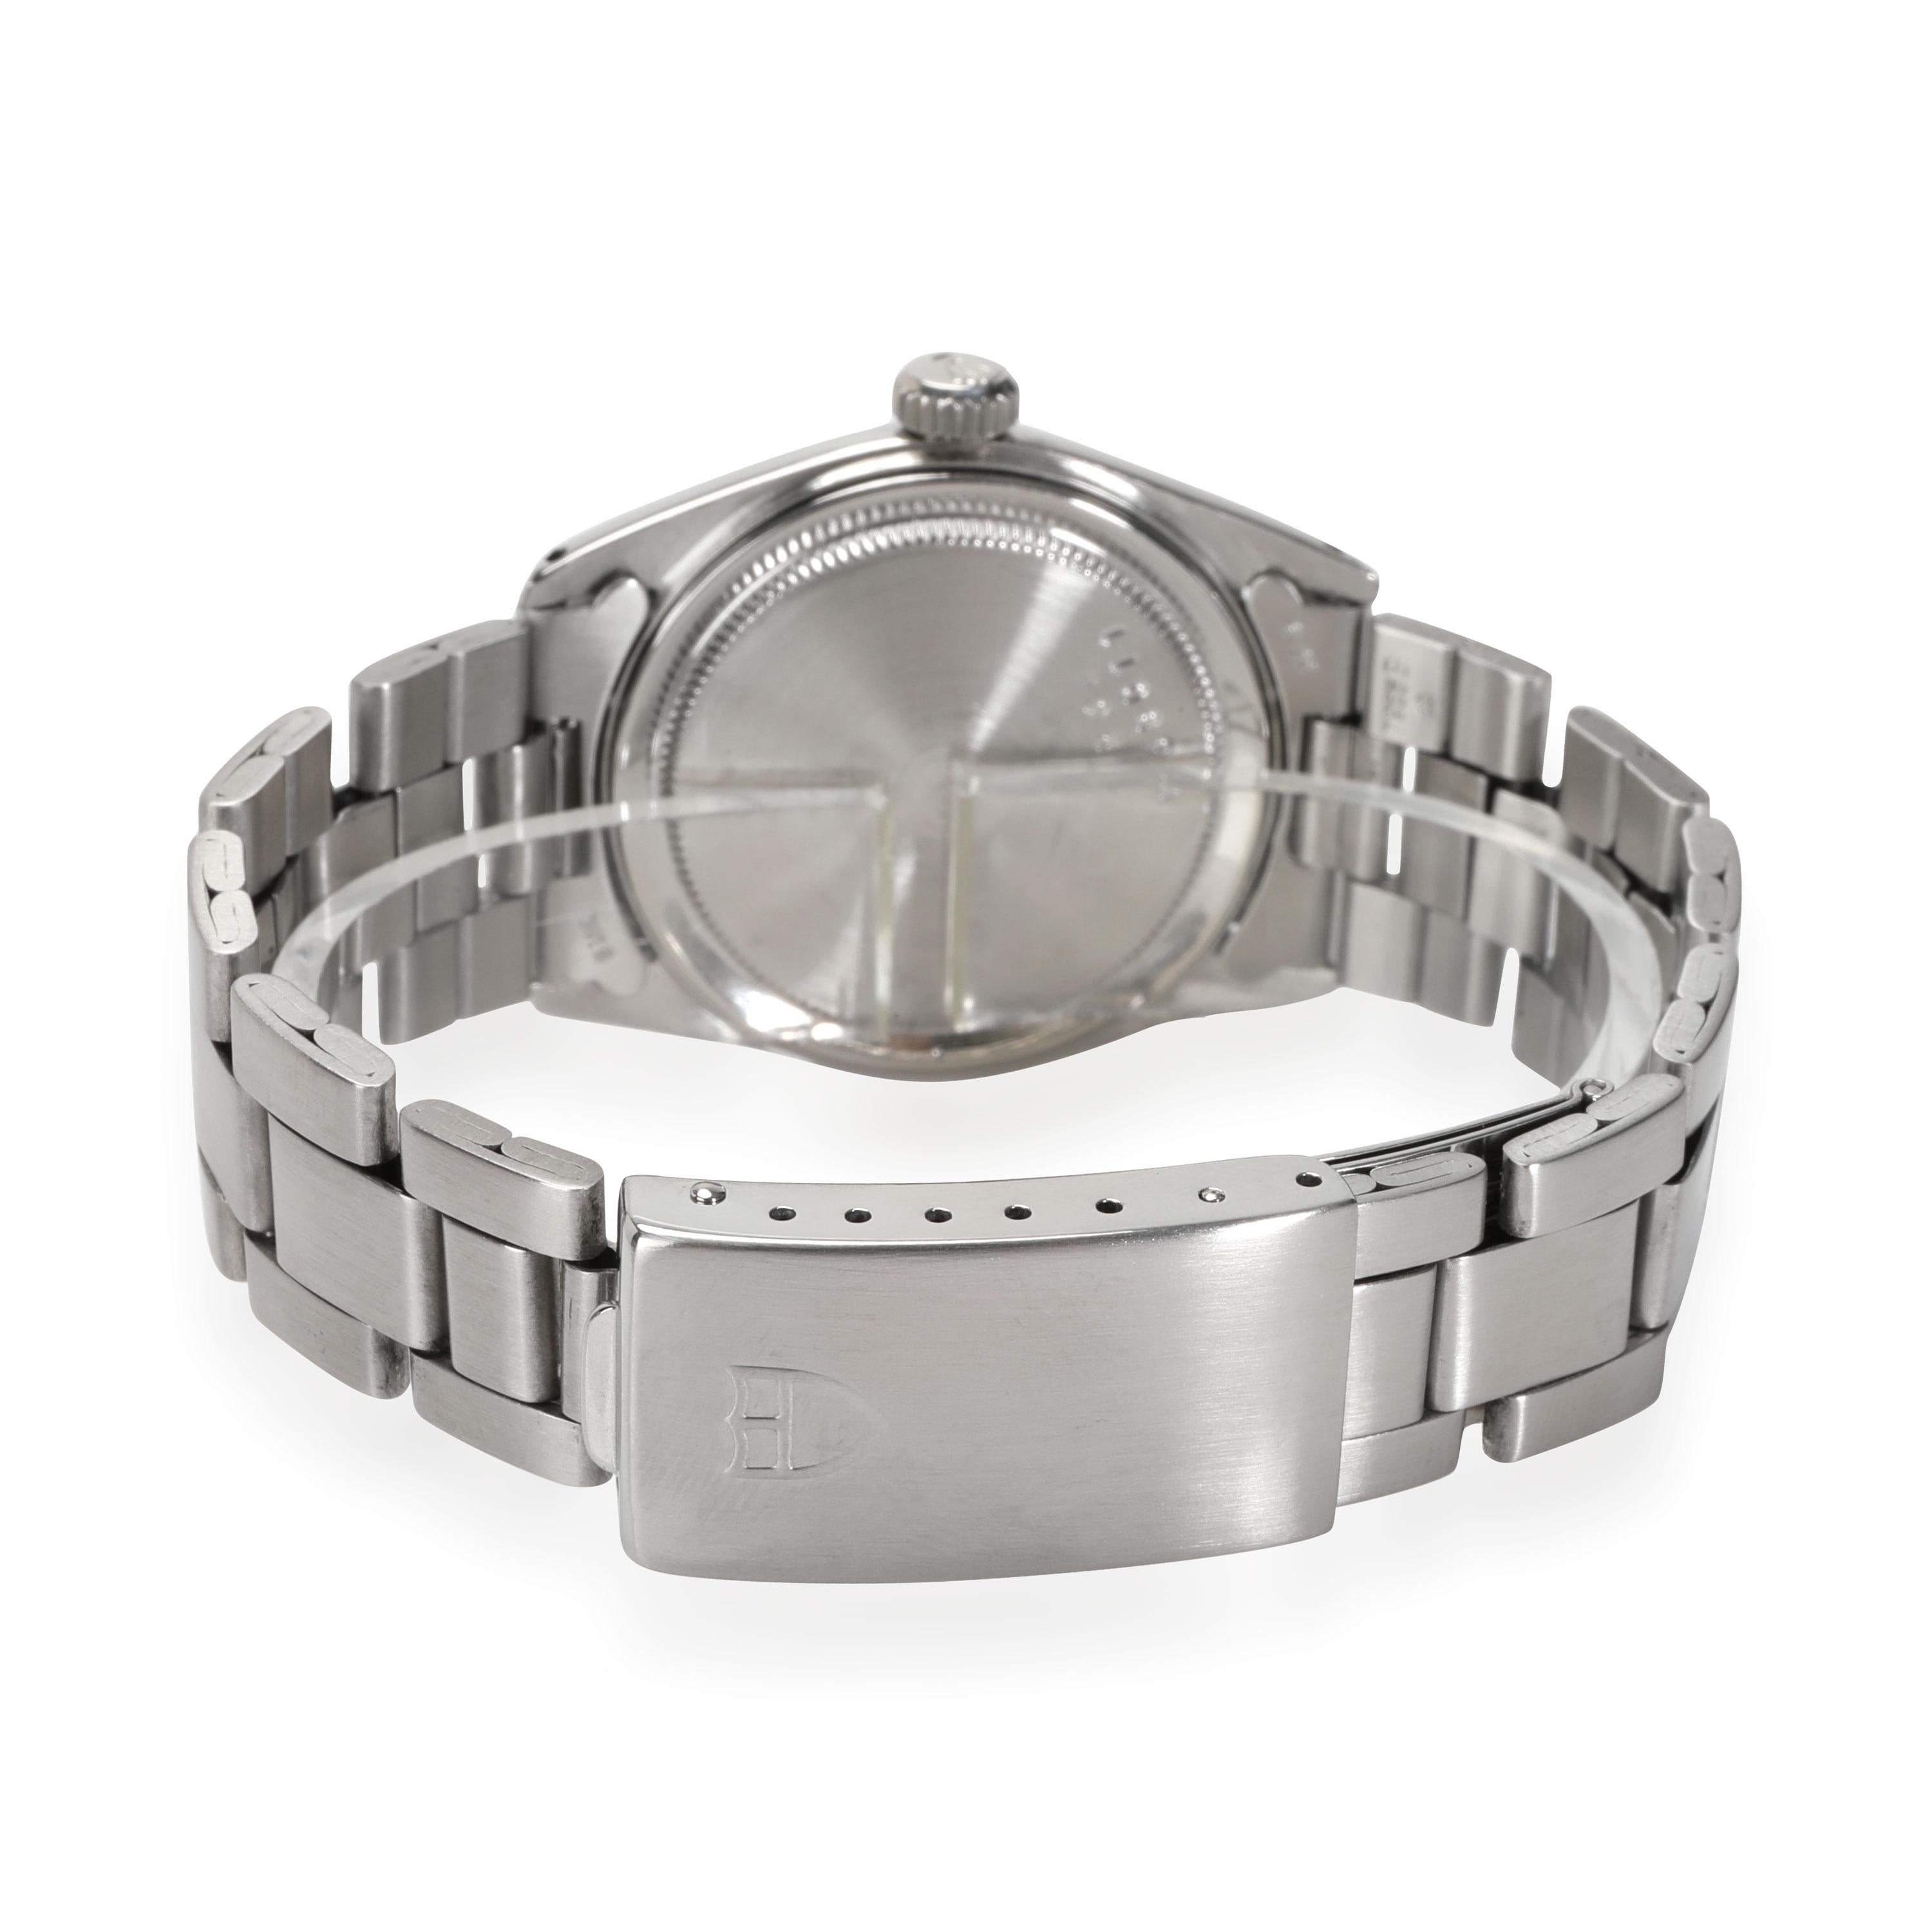 Tudor Oyster 7934 Unisex Watch in  Stainless Steel

